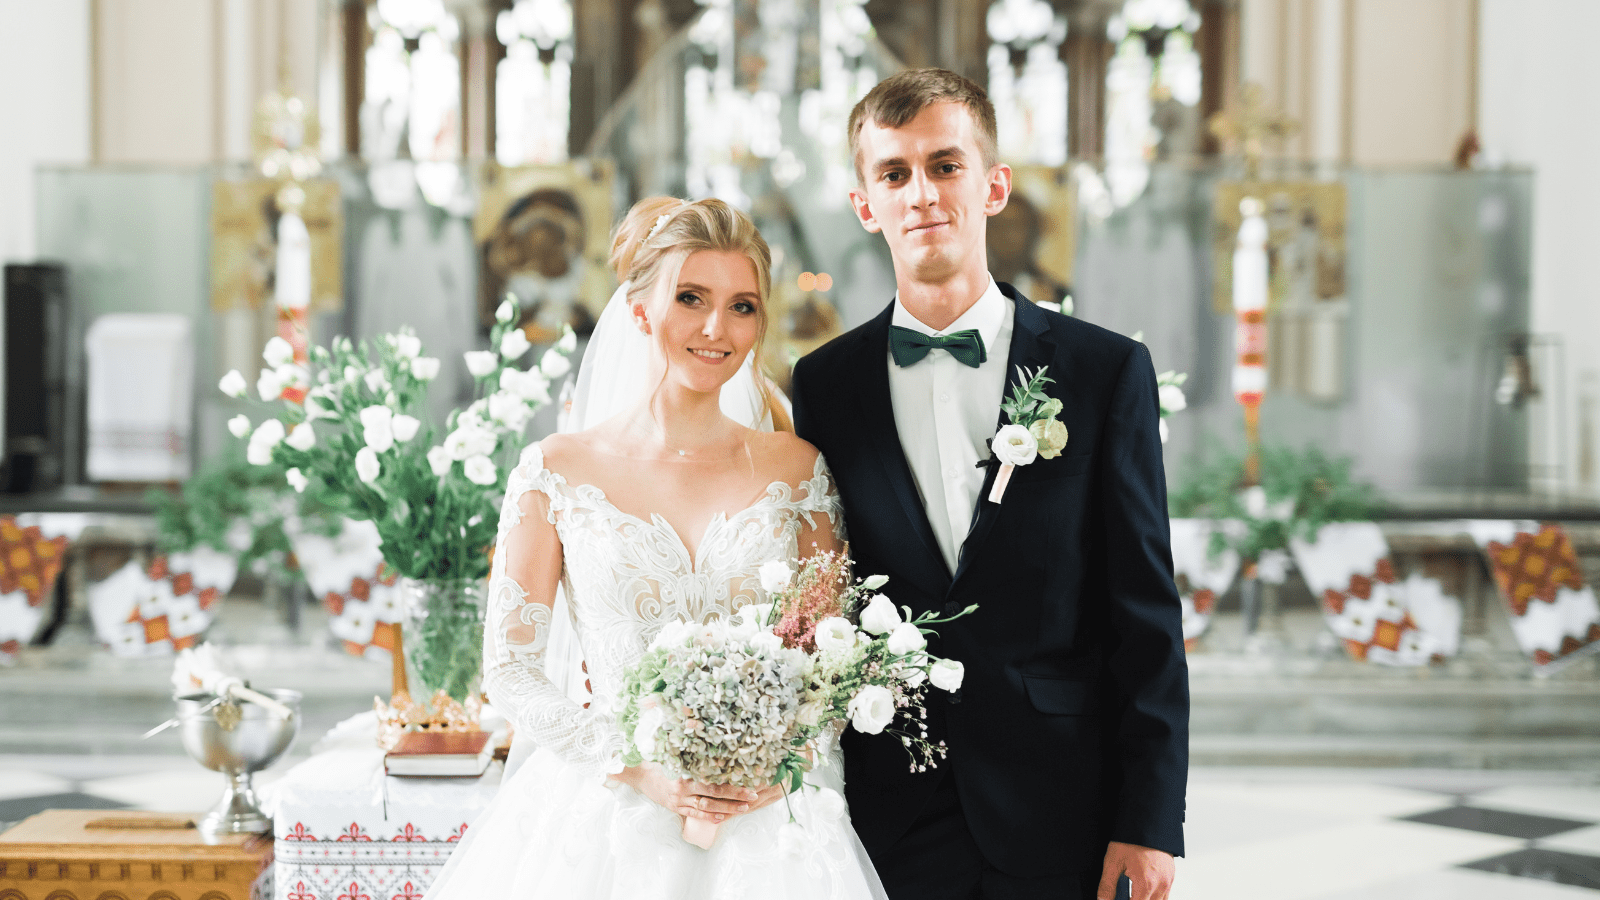 Married couple posing in a church after ceremony.